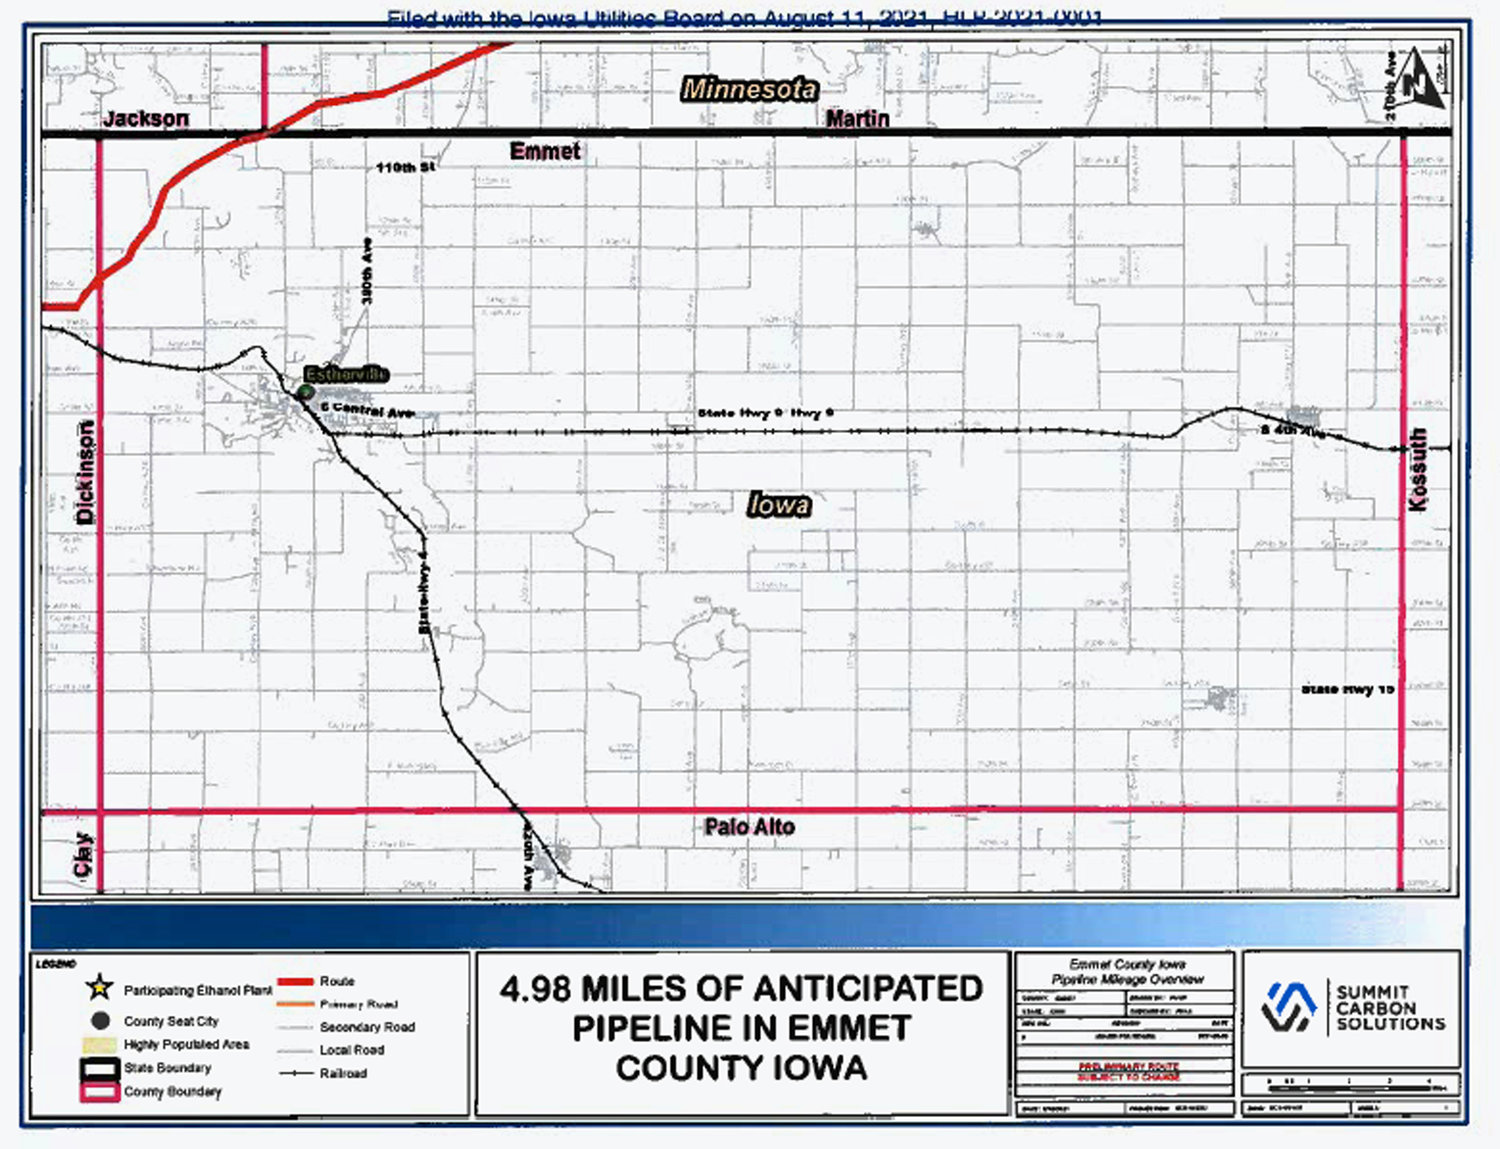 This map of Emmet County created by Summit Carbon Solutions shows the proposed five miles of pipeline that would cross the northwest corner of Emmet County at the Martin/Jackson county line.